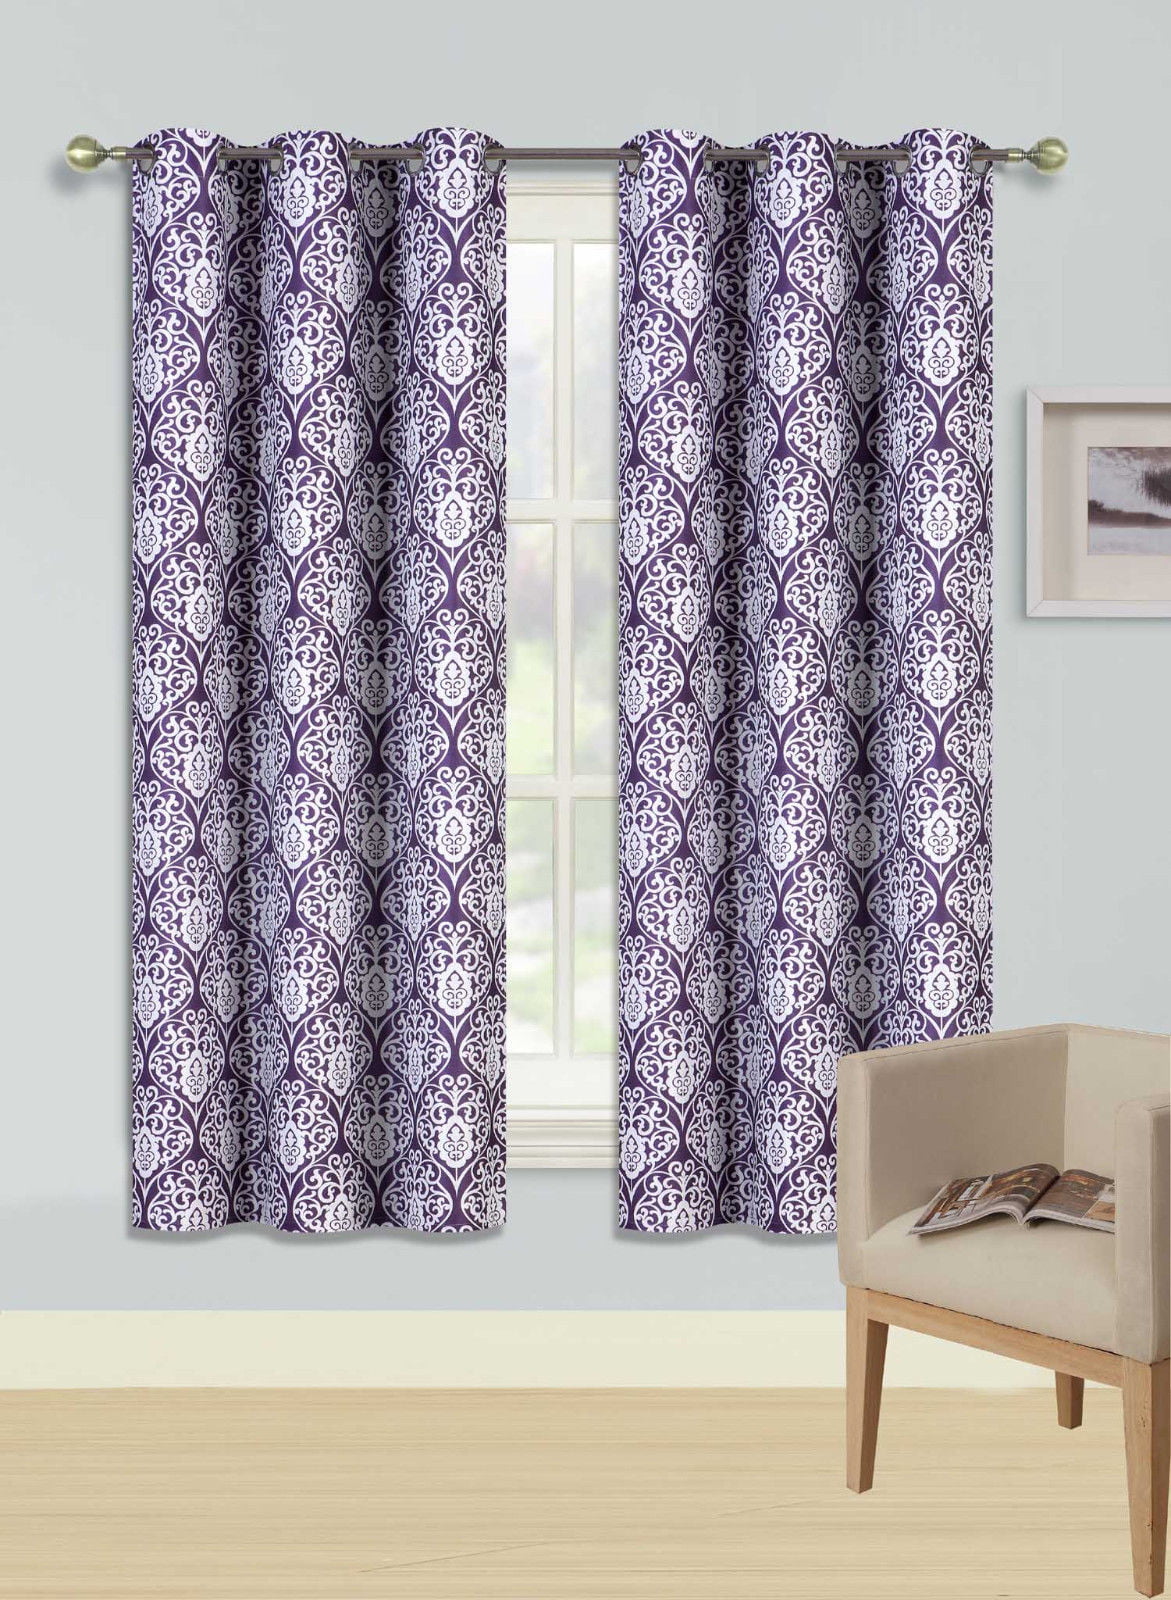 Garden Curtains 2 Window Curtains Design Blackout Lined Panels Silver